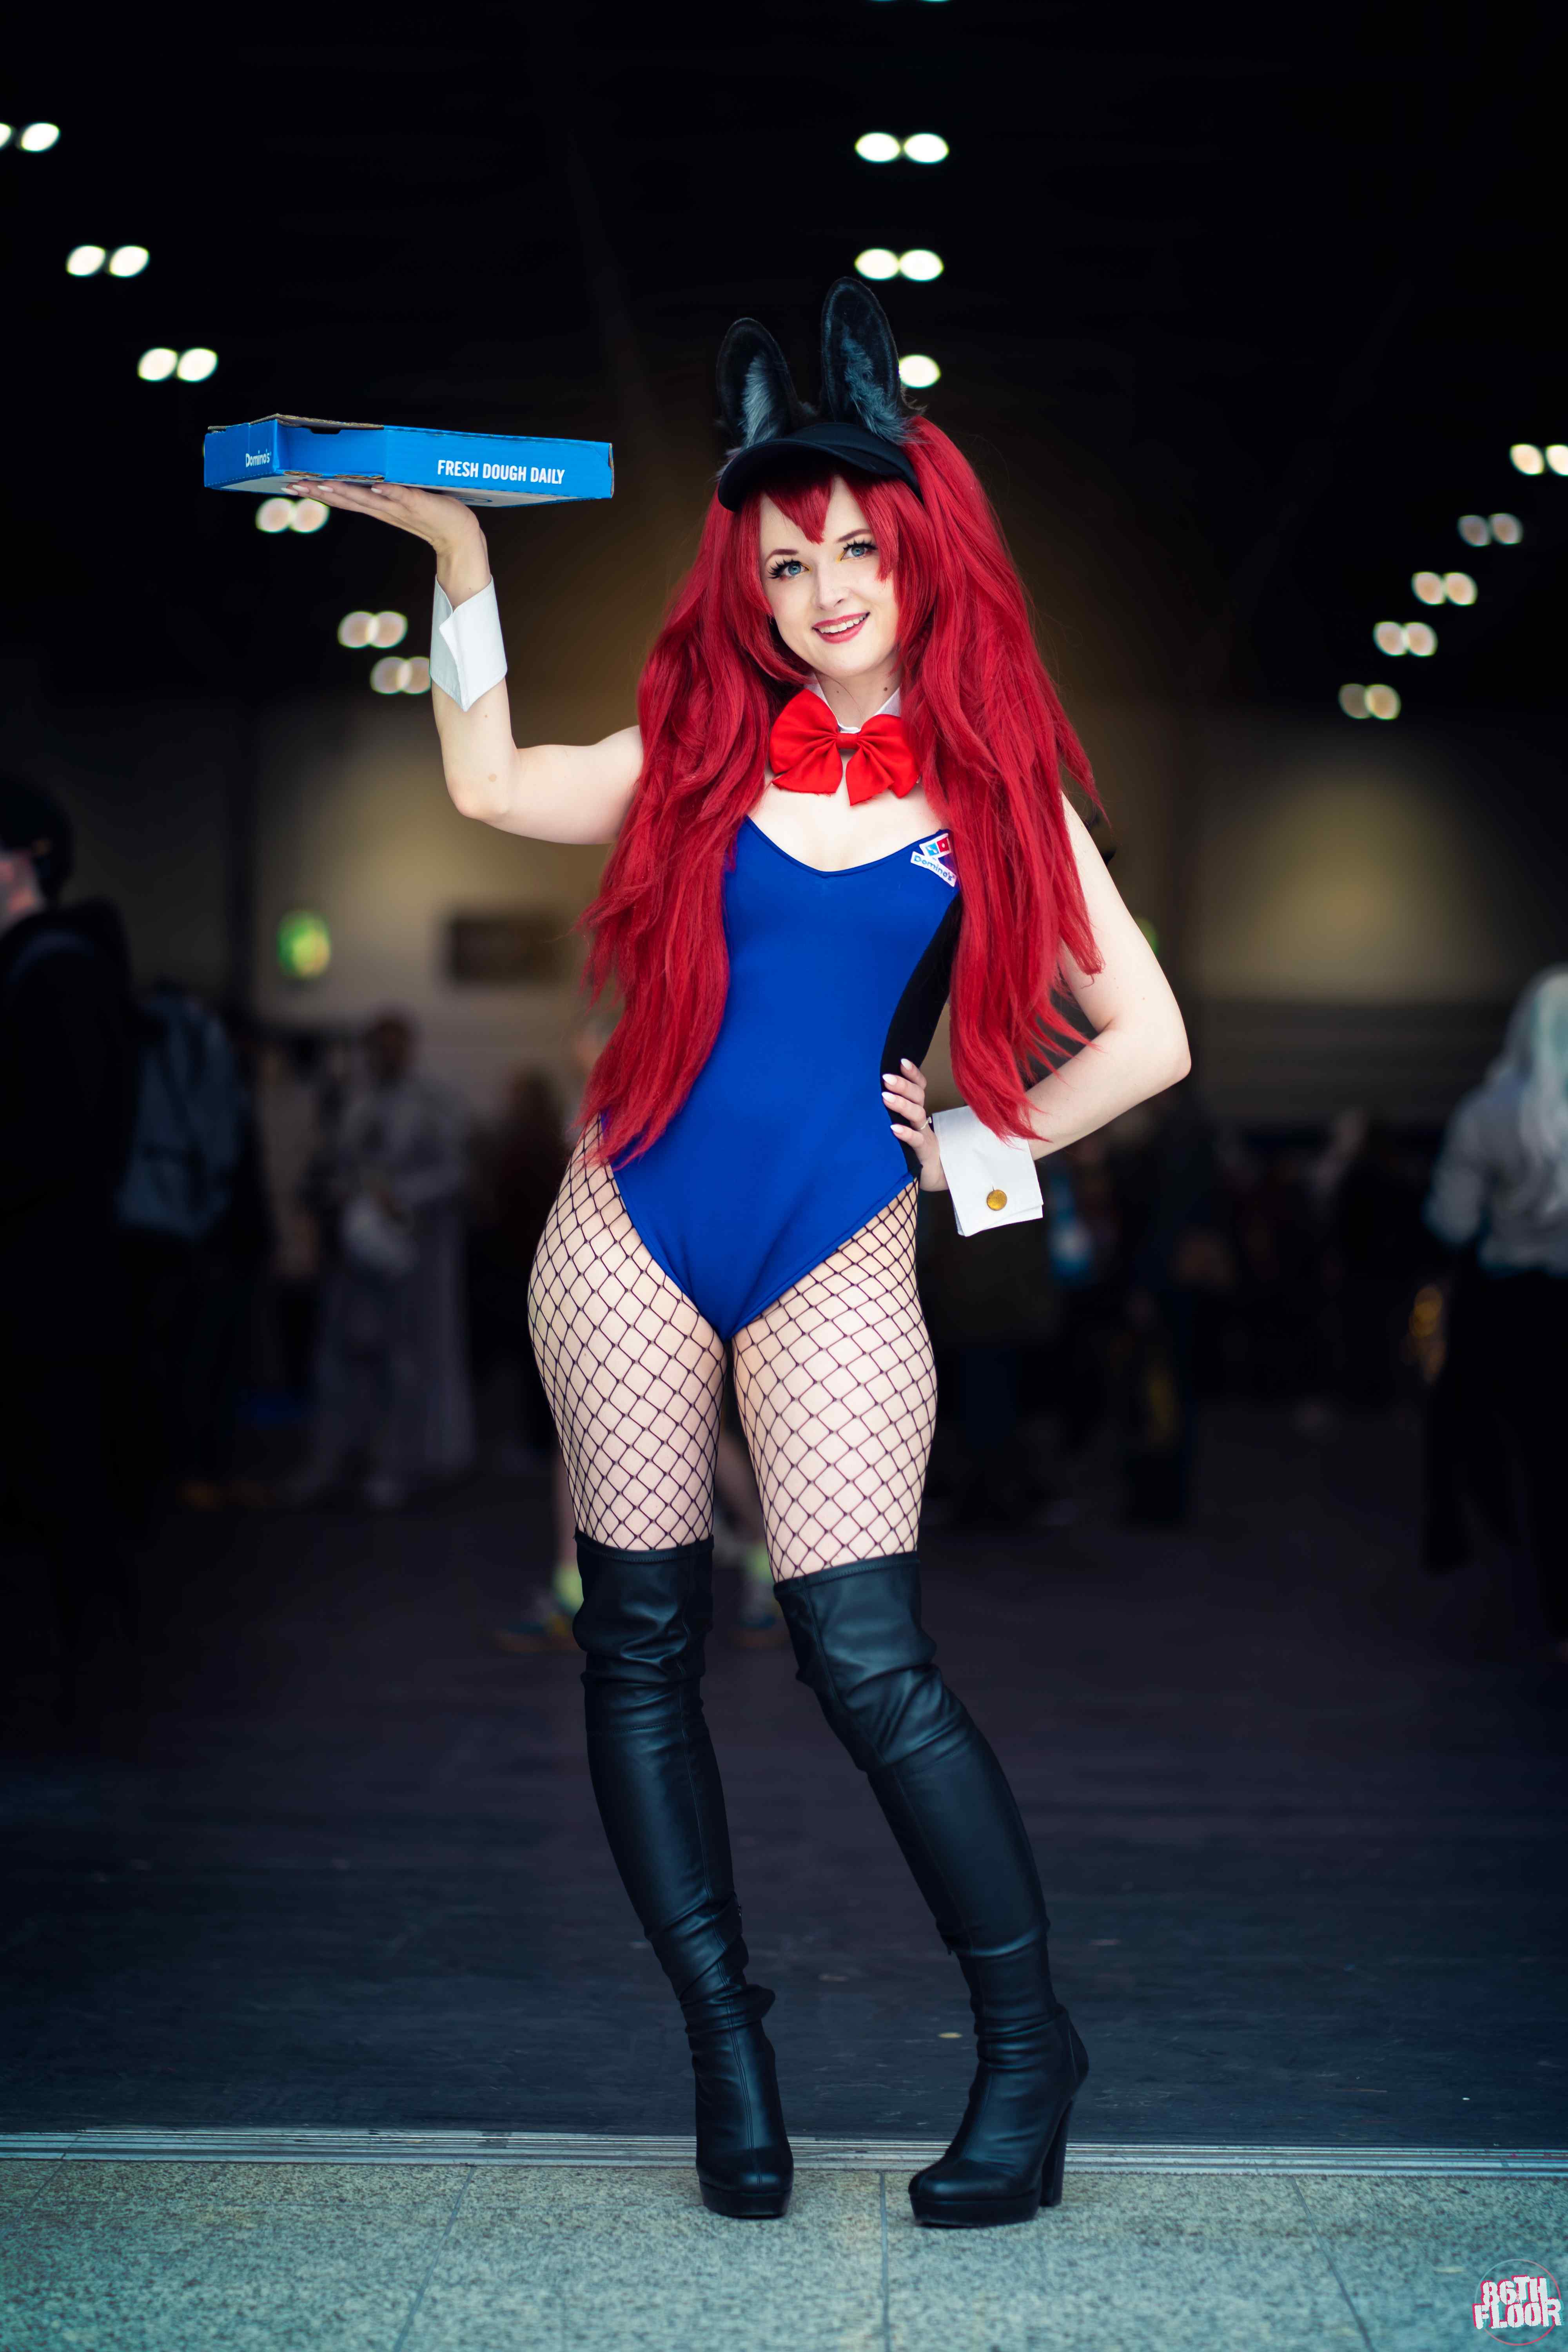 Bunny girl cosplayer from MCM London ComicCon May 2022